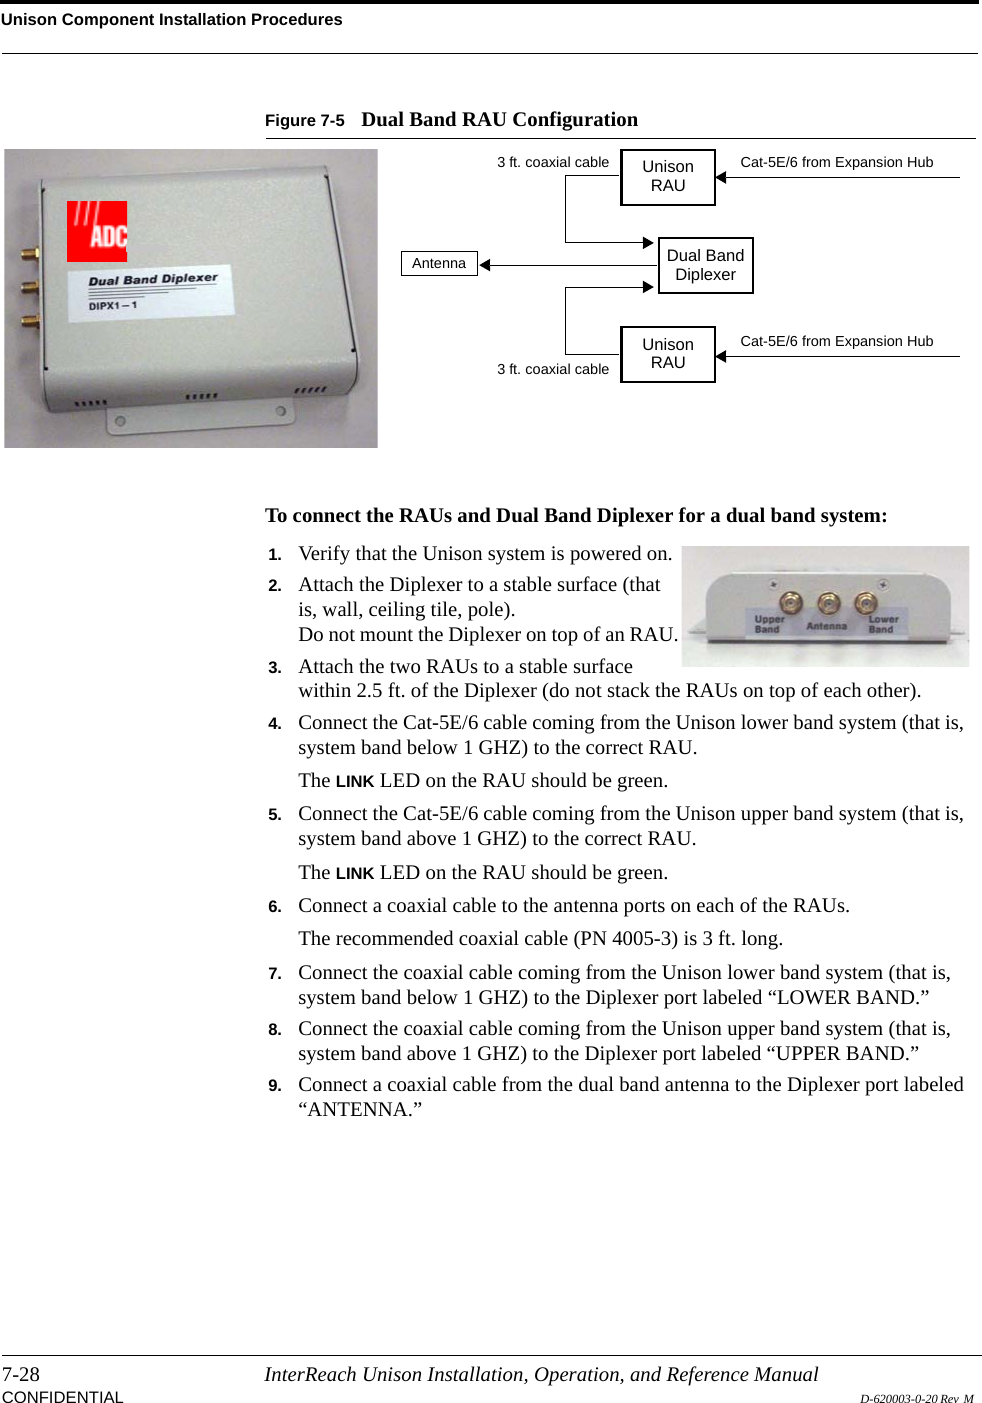 Unison Component Installation Procedures7-28 InterReach Unison Installation, Operation, and Reference ManualCONFIDENTIAL D-620003-0-20 Rev  M Figure 7-5 Dual Band RAU ConfigurationTo connect the RAUs and Dual Band Diplexer for a dual band system:UnisonRAUUnisonRAUDual BandDiplexerCat-5E/6 from Expansion HubCat-5E/6 from Expansion HubAntenna3 ft. coaxial cable3 ft. coaxial cableDual Band Diplexer1. Verify that the Unison system is powered on.2. Attach the Diplexer to a stable surface (that is, wall, ceiling tile, pole).Do not mount the Diplexer on top of an RAU.3. Attach the two RAUs to a stable surface within 2.5 ft. of the Diplexer (do not stack the RAUs on top of each other).4. Connect the Cat-5E/6 cable coming from the Unison lower band system (that is, system band below 1 GHZ) to the correct RAU.The LINK LED on the RAU should be green.5. Connect the Cat-5E/6 cable coming from the Unison upper band system (that is, system band above 1 GHZ) to the correct RAU.The LINK LED on the RAU should be green.6. Connect a coaxial cable to the antenna ports on each of the RAUs.The recommended coaxial cable (PN 4005-3) is 3 ft. long.7. Connect the coaxial cable coming from the Unison lower band system (that is, system band below 1 GHZ) to the Diplexer port labeled “LOWER BAND.”8. Connect the coaxial cable coming from the Unison upper band system (that is, system band above 1 GHZ) to the Diplexer port labeled “UPPER BAND.”9. Connect a coaxial cable from the dual band antenna to the Diplexer port labeled “ANTENNA.”